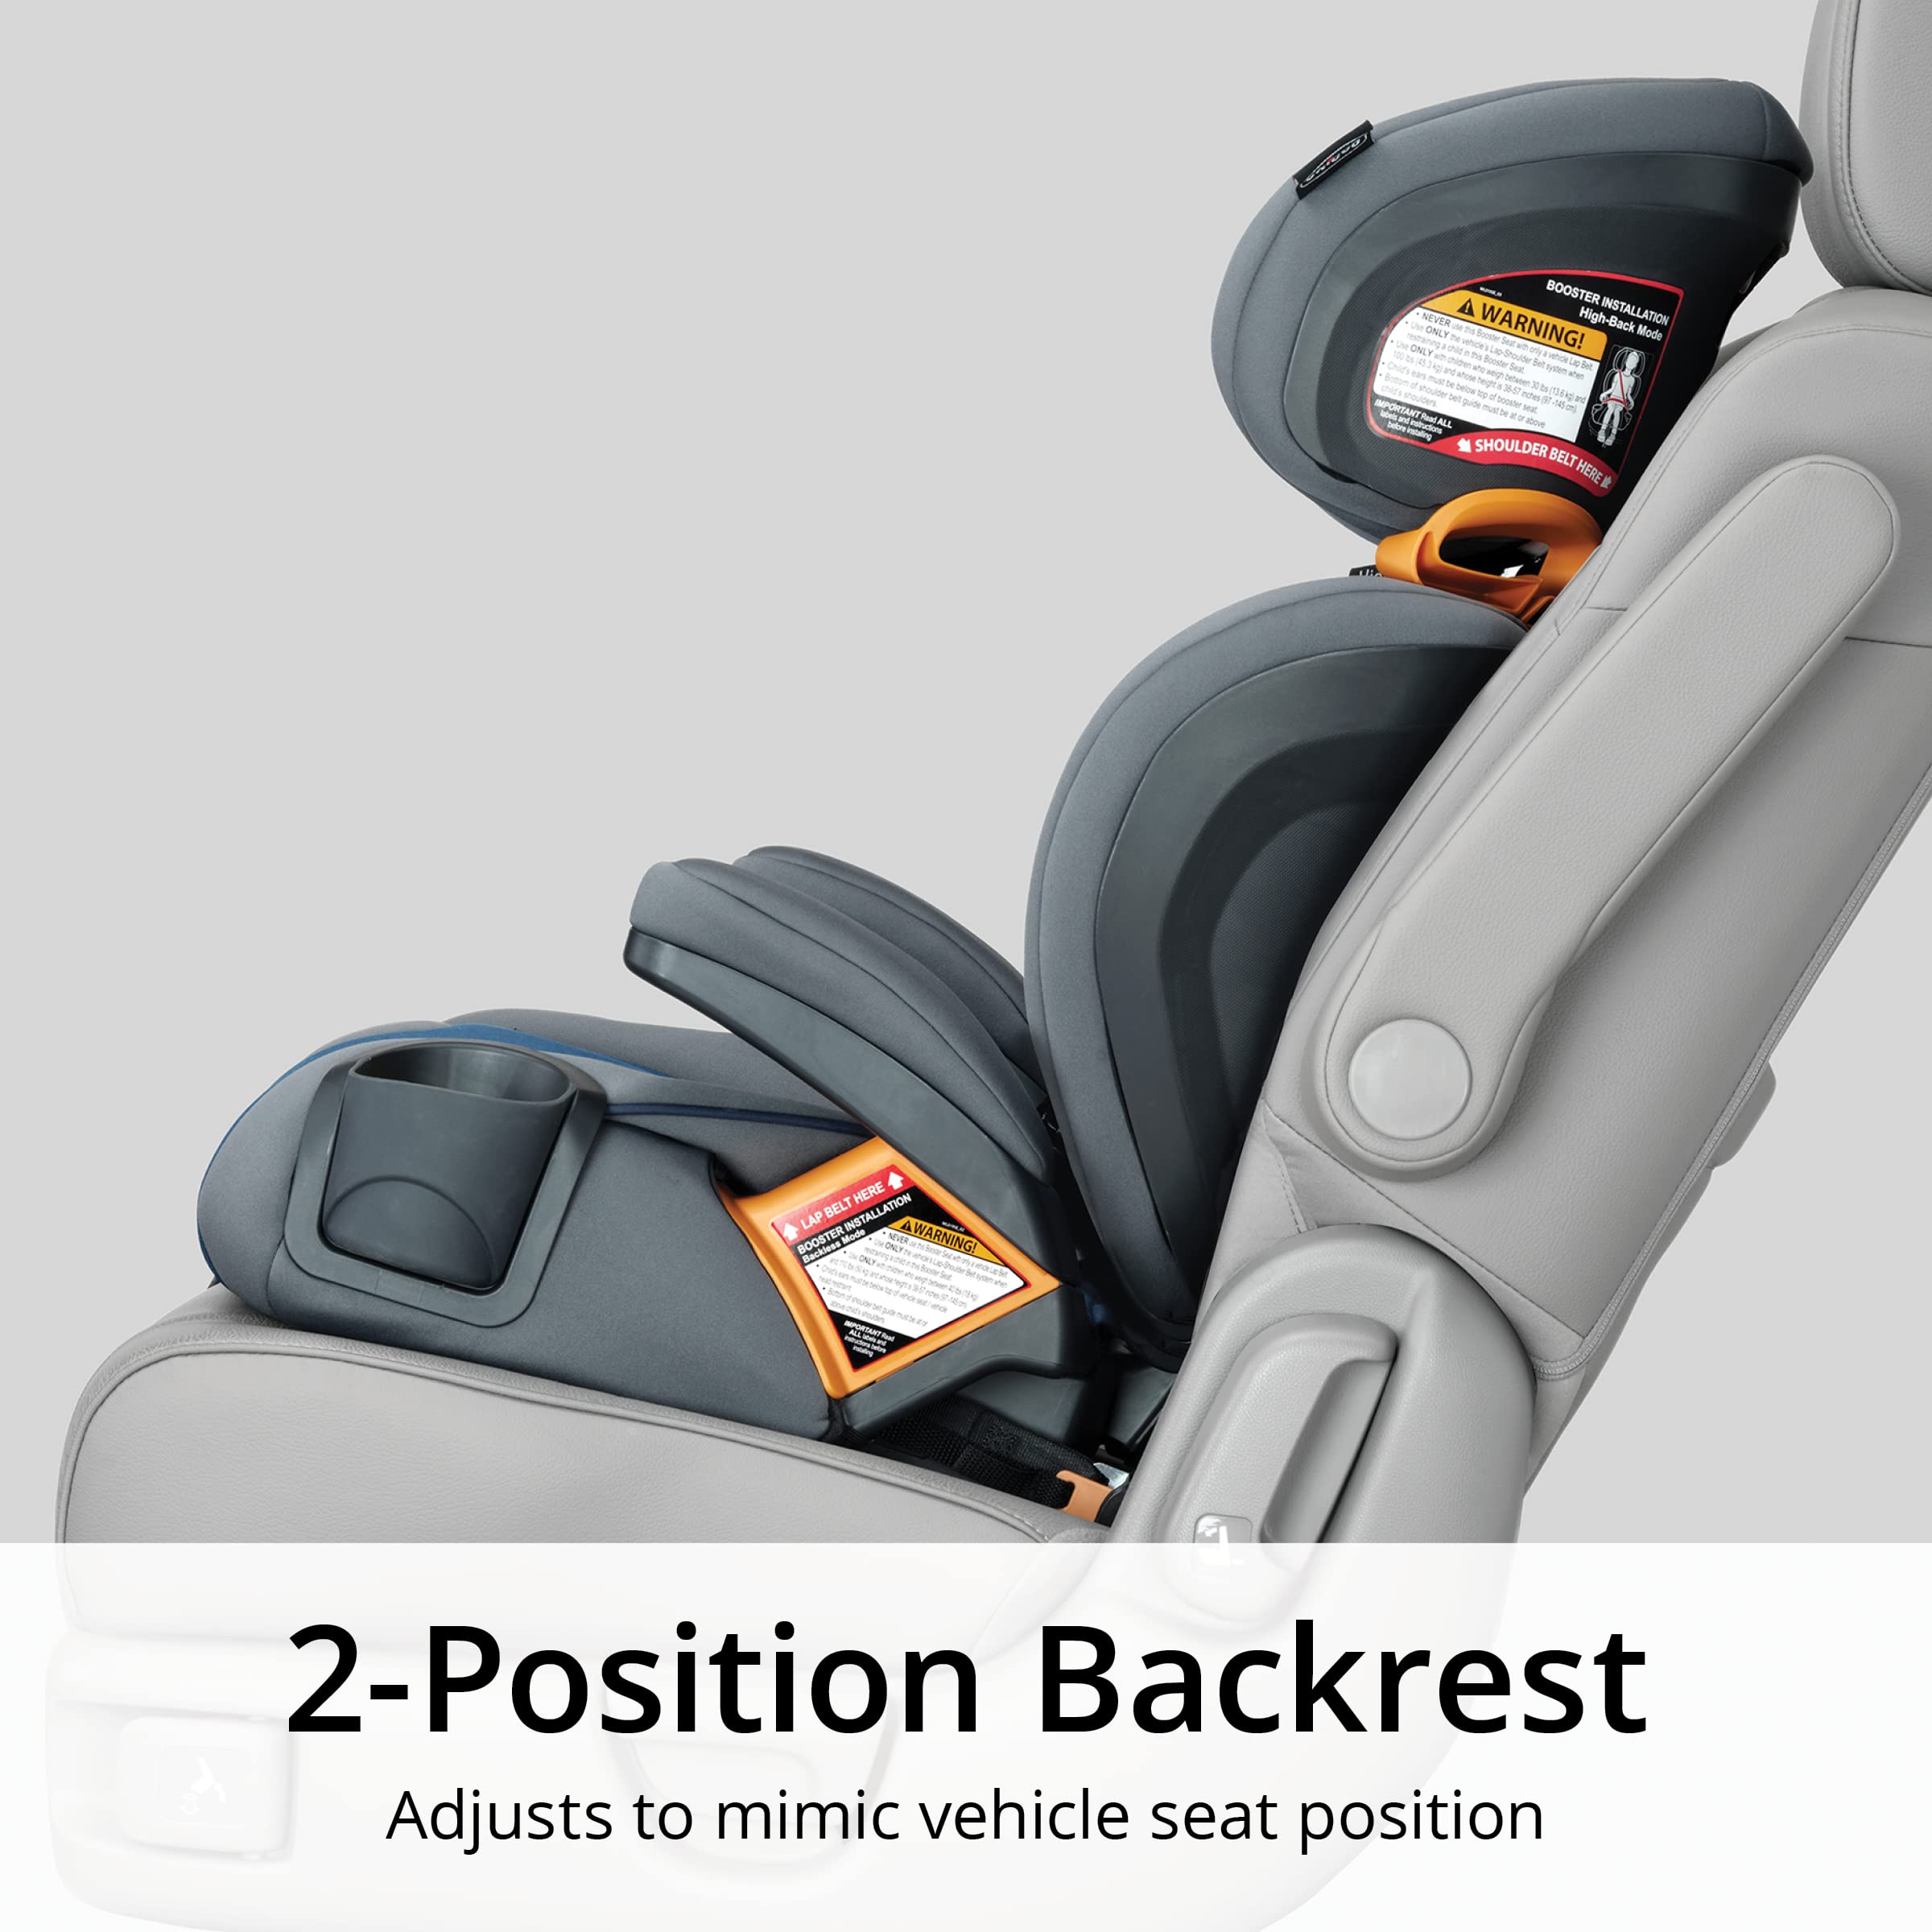 Chicco KidFit Adapt Plus 2-in-1 Belt-Positioning Booster Car Seat, Backless and High Back Booster Seat, for Children Aged 4 Years and up and 40-100 lbs. | Ember/Black